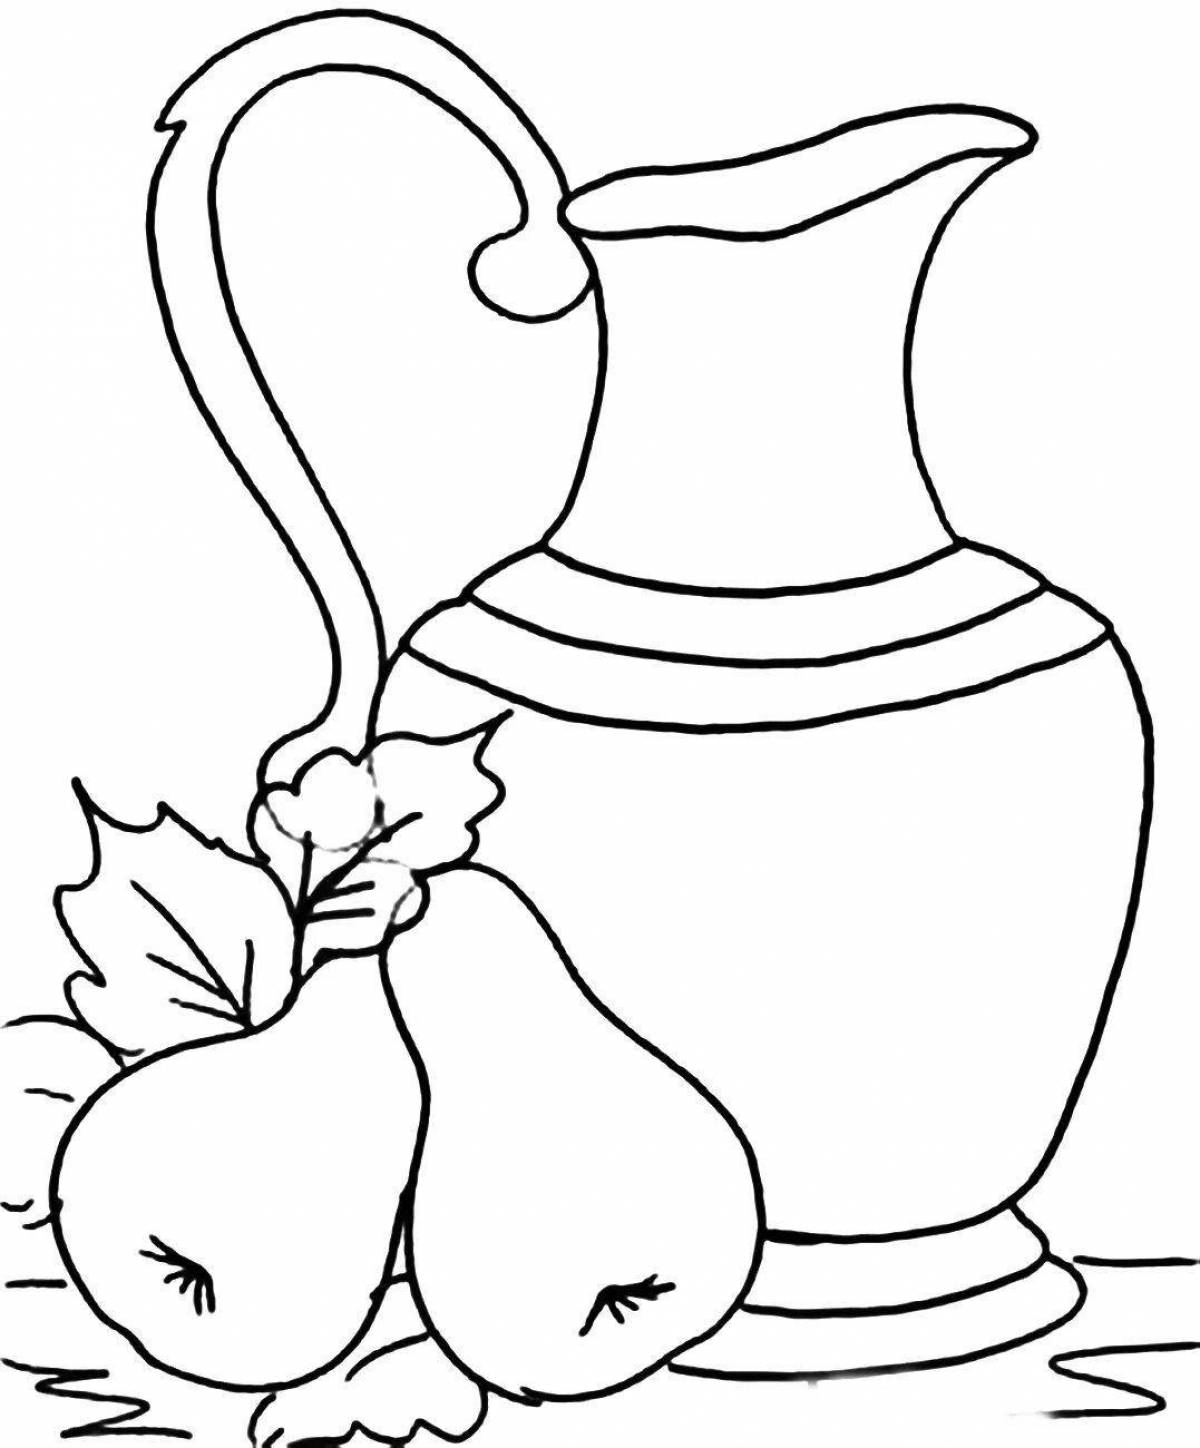 Coloring book cheerful still life